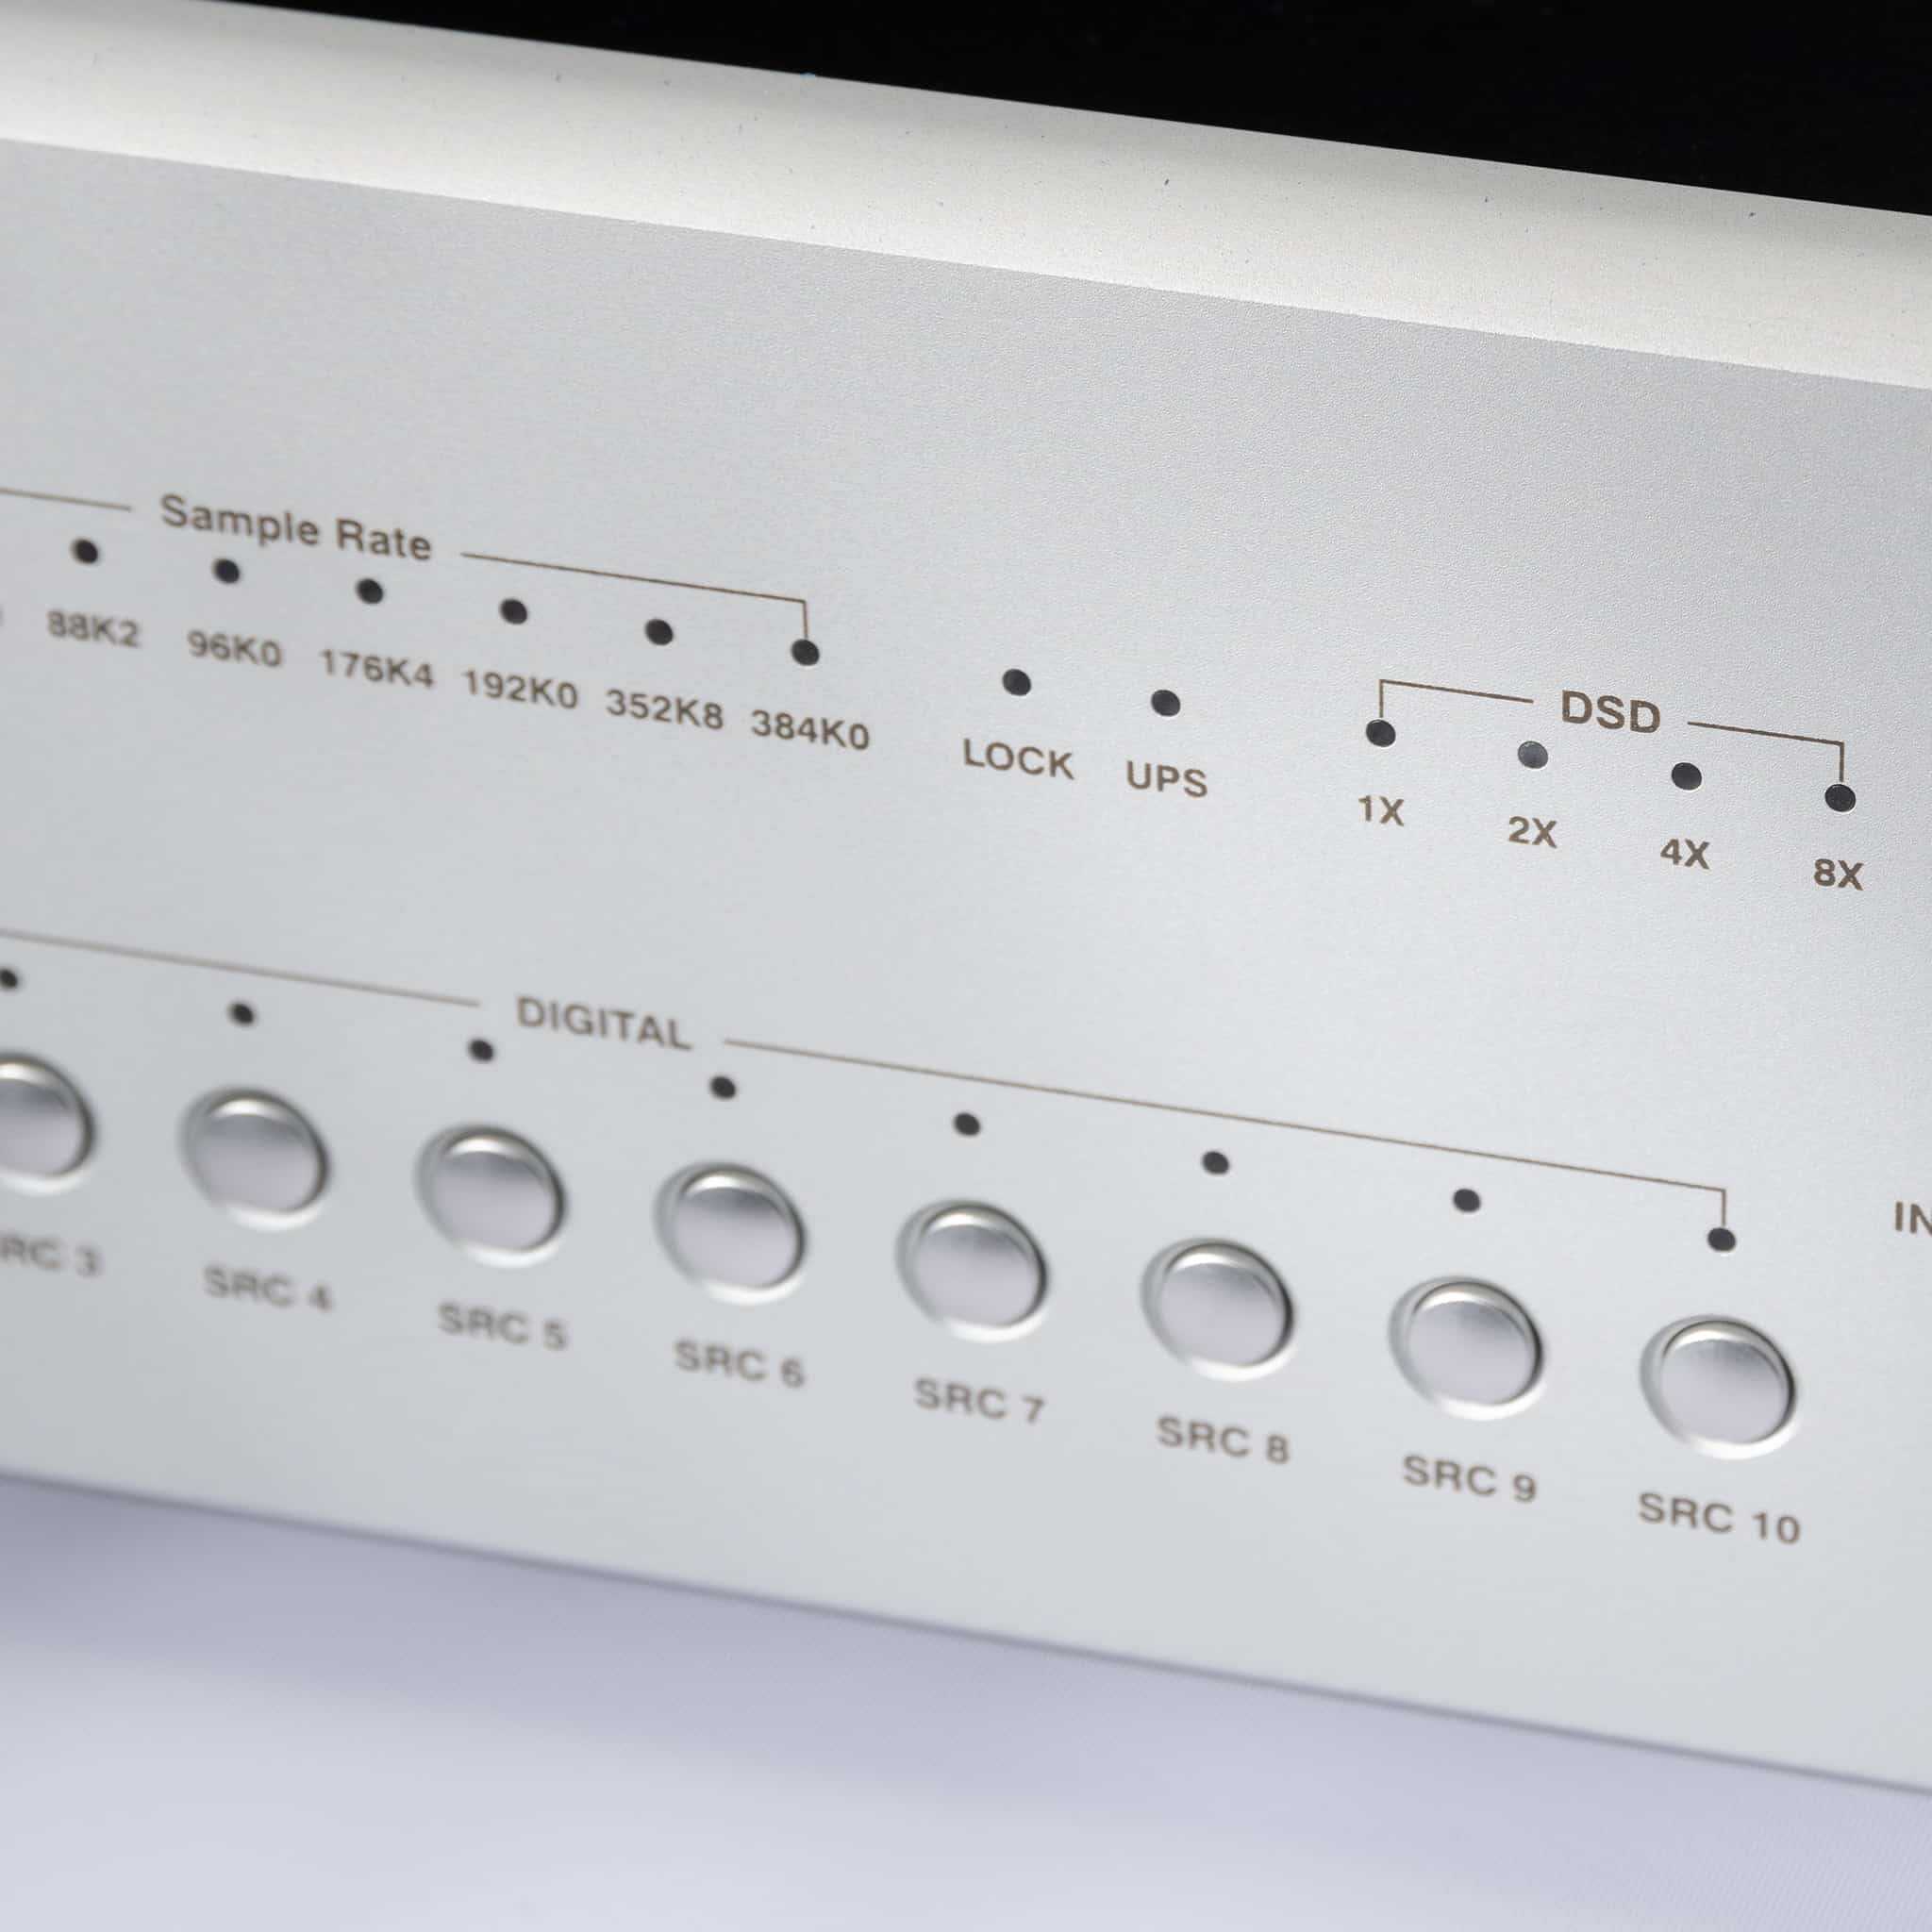 Up to 10 digital inputs (when optional HDMI module is installed) can support up to PCM 384k / 32 bit and DSD 4X depending on interface type.